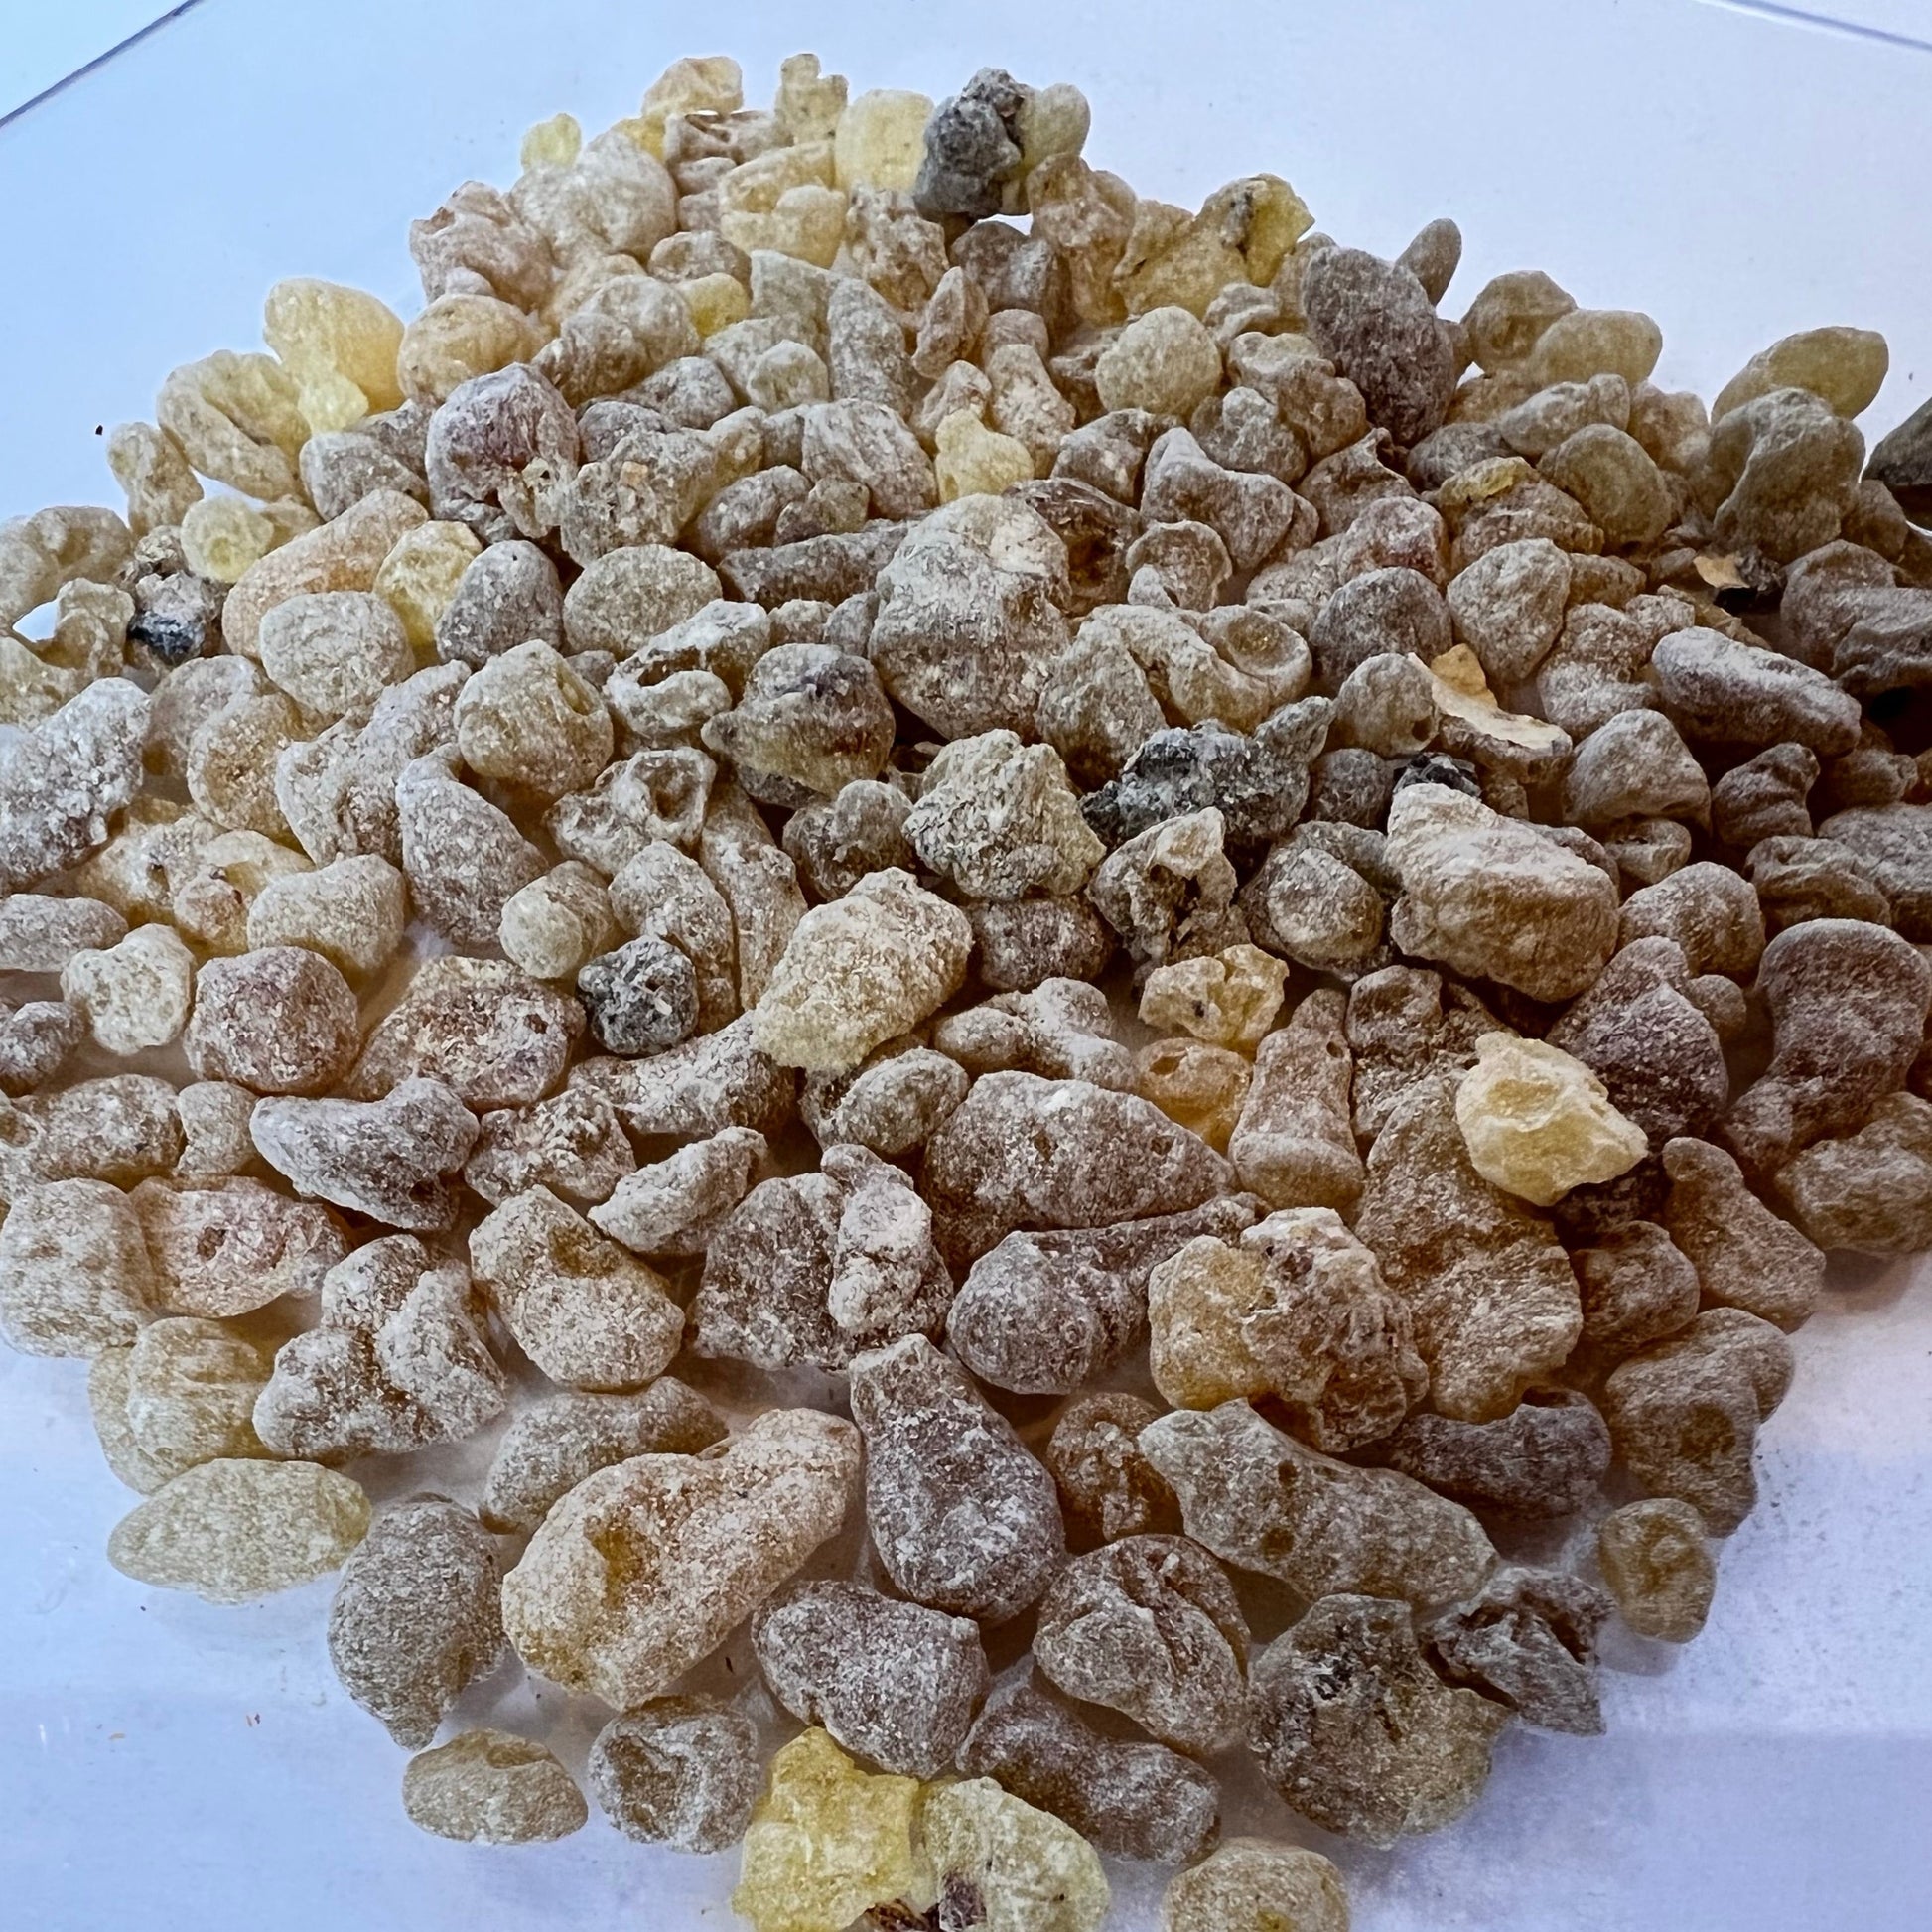 1 ounce Frankincense Resin close-up